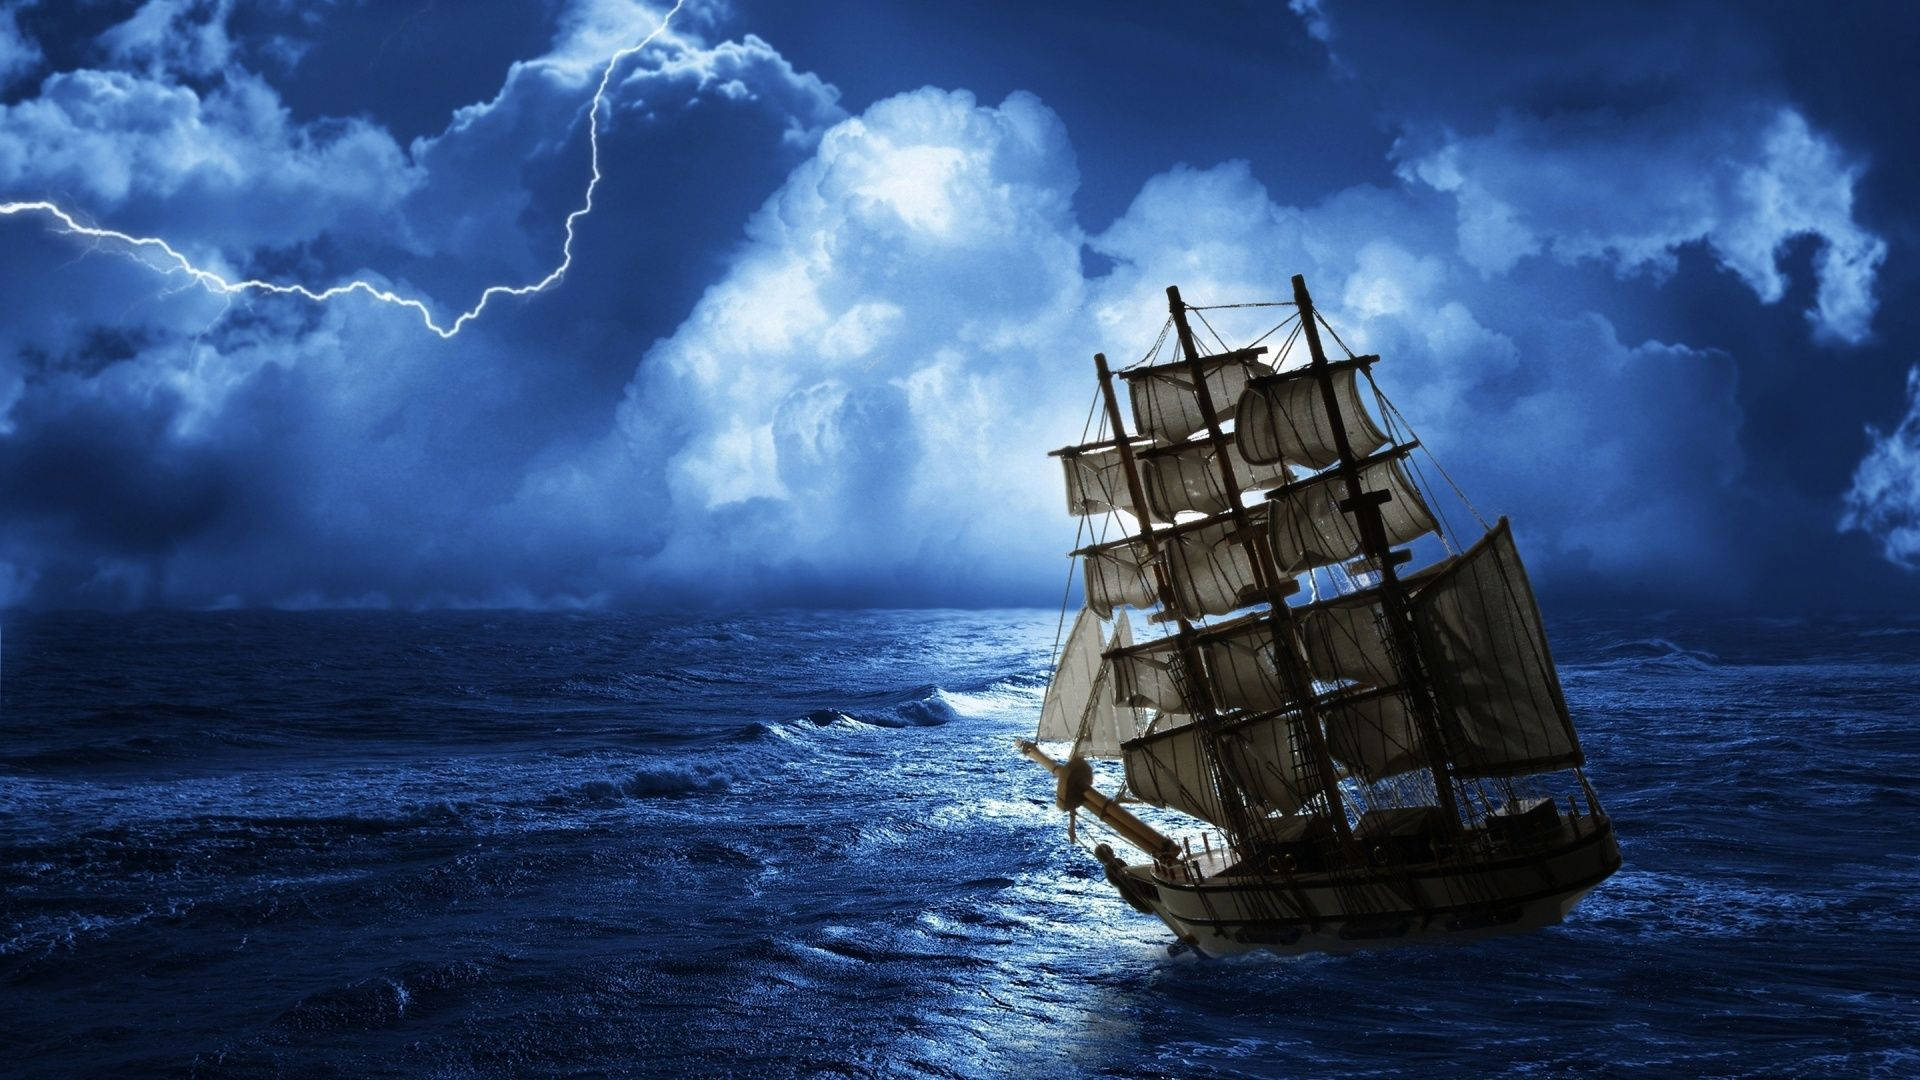 Sail Away Into the Stormy Night Sky Wallpaper